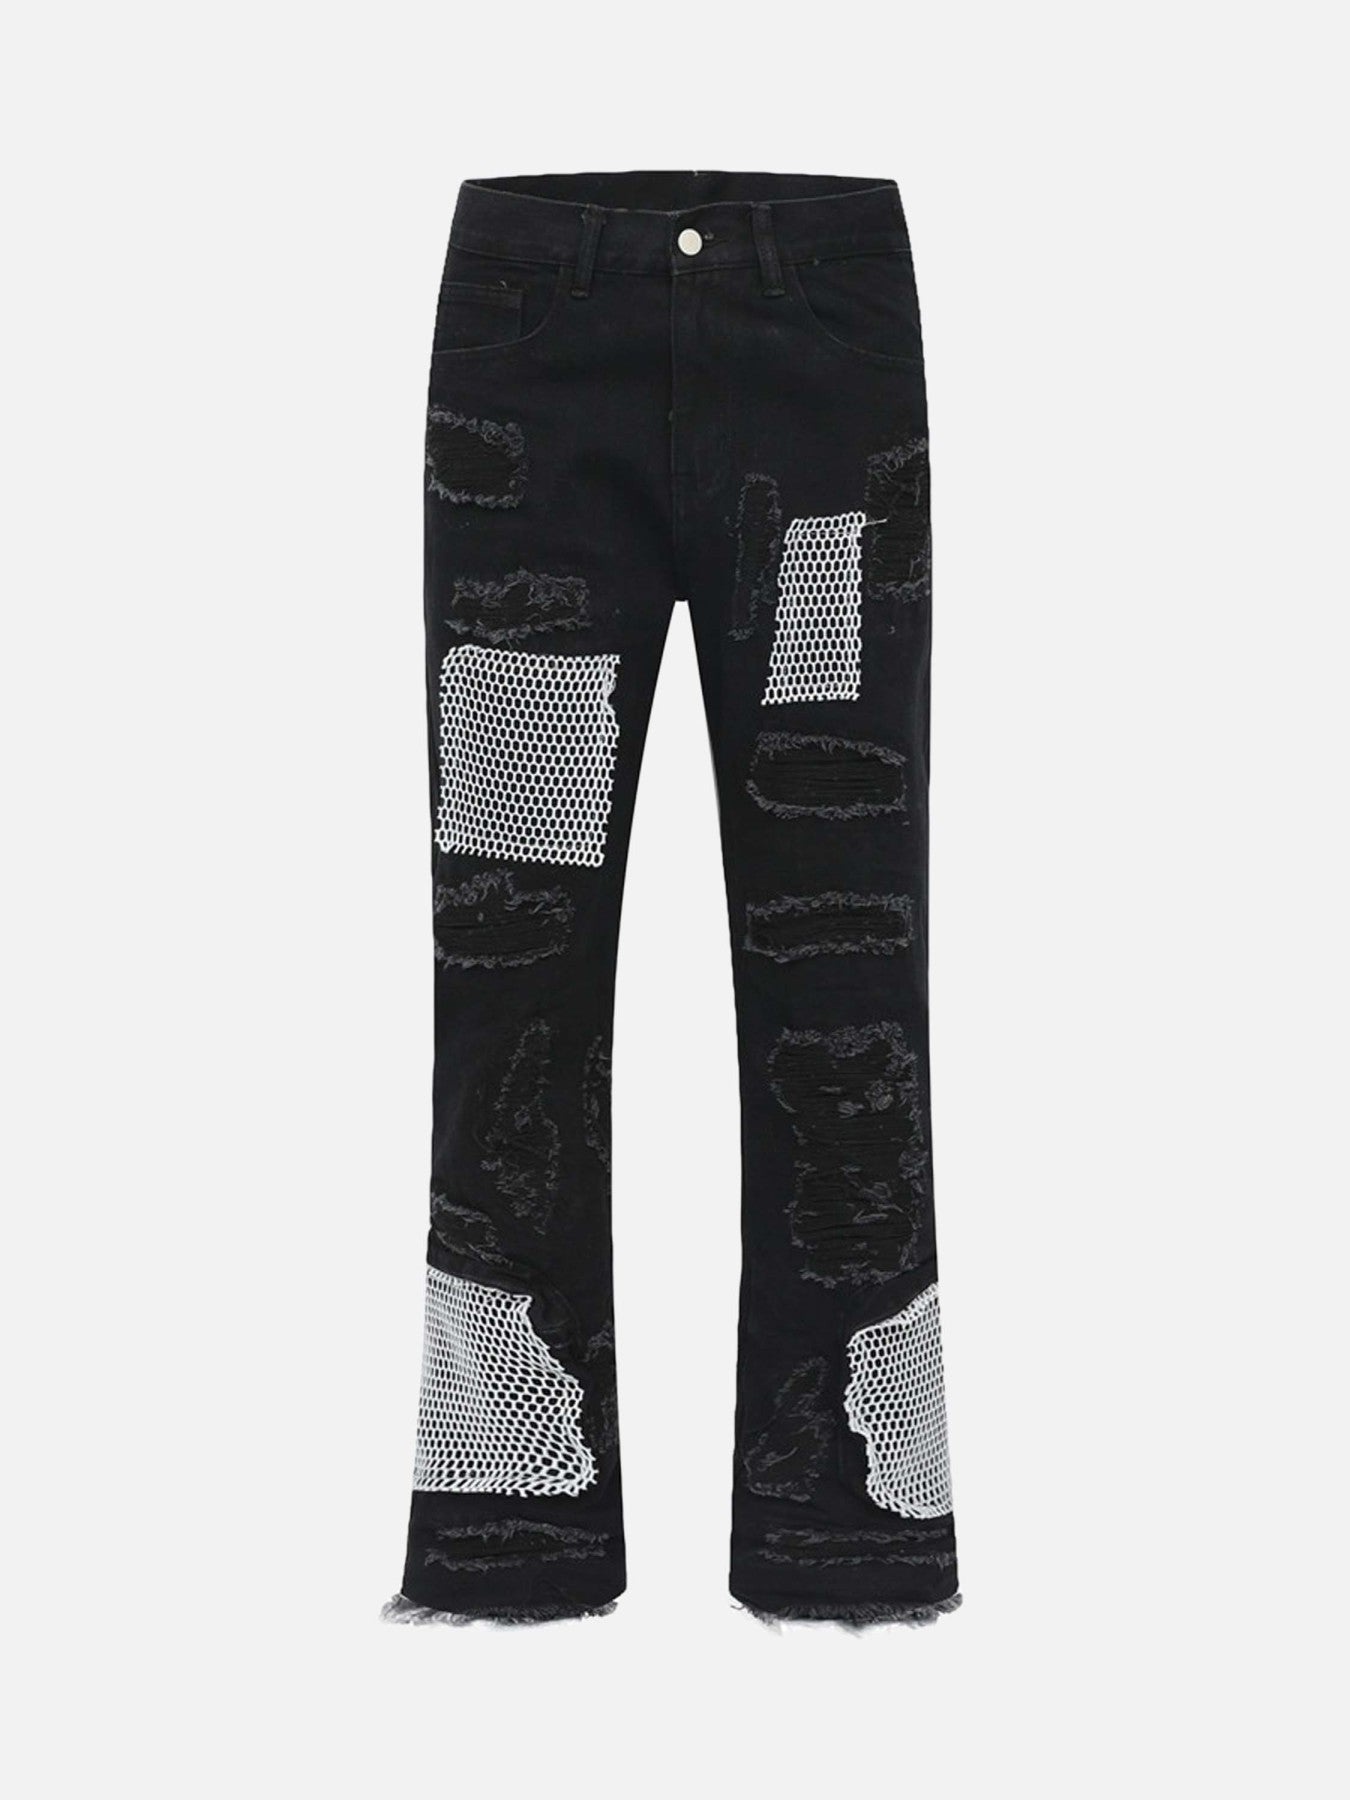 The Supermade Heavy-duty Ripped Denim Pants